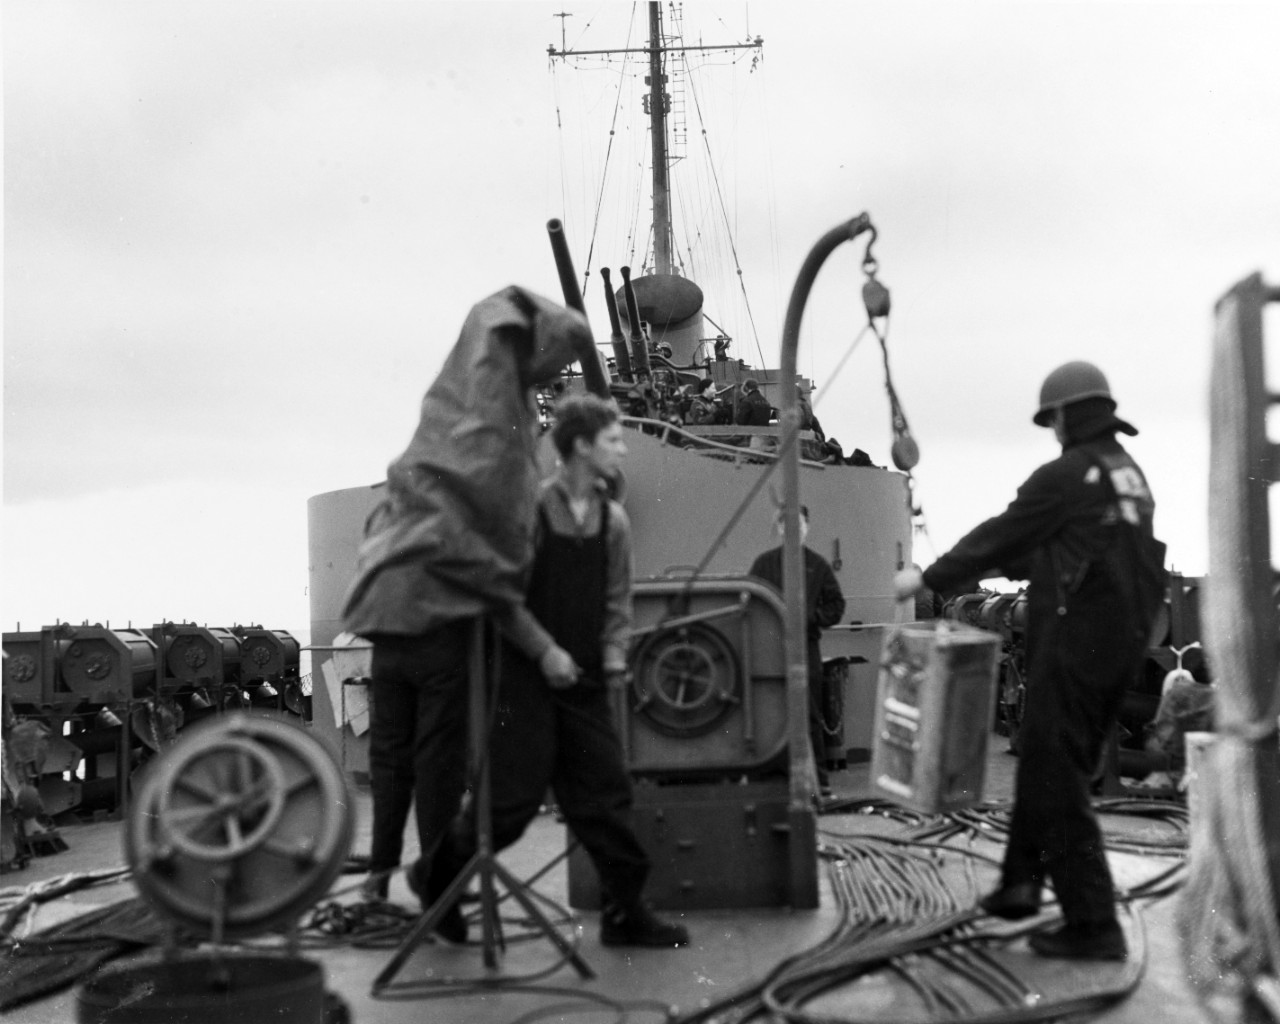 Crewmembers of Frederick C. Davis at work on the ship’s fantail, during Operation Shingle. (U.S. Navy Photograph 80-G-223466, National Archives and Records Administration, Still Pictures Division, College Park, Md.)